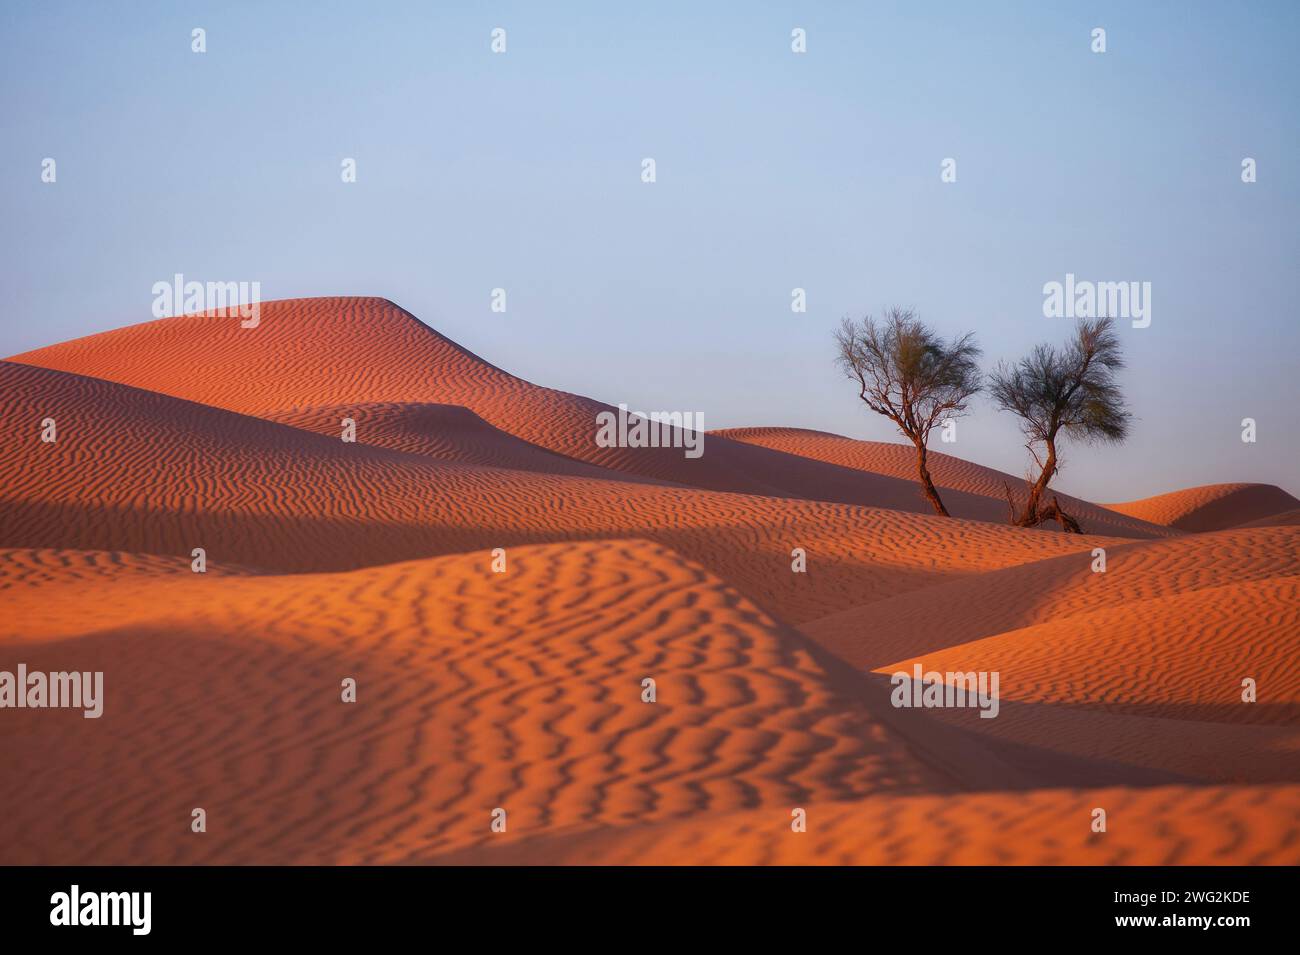 gin bush in the desert sahara at evening sunlight and dunes with long shadows Stock Photo